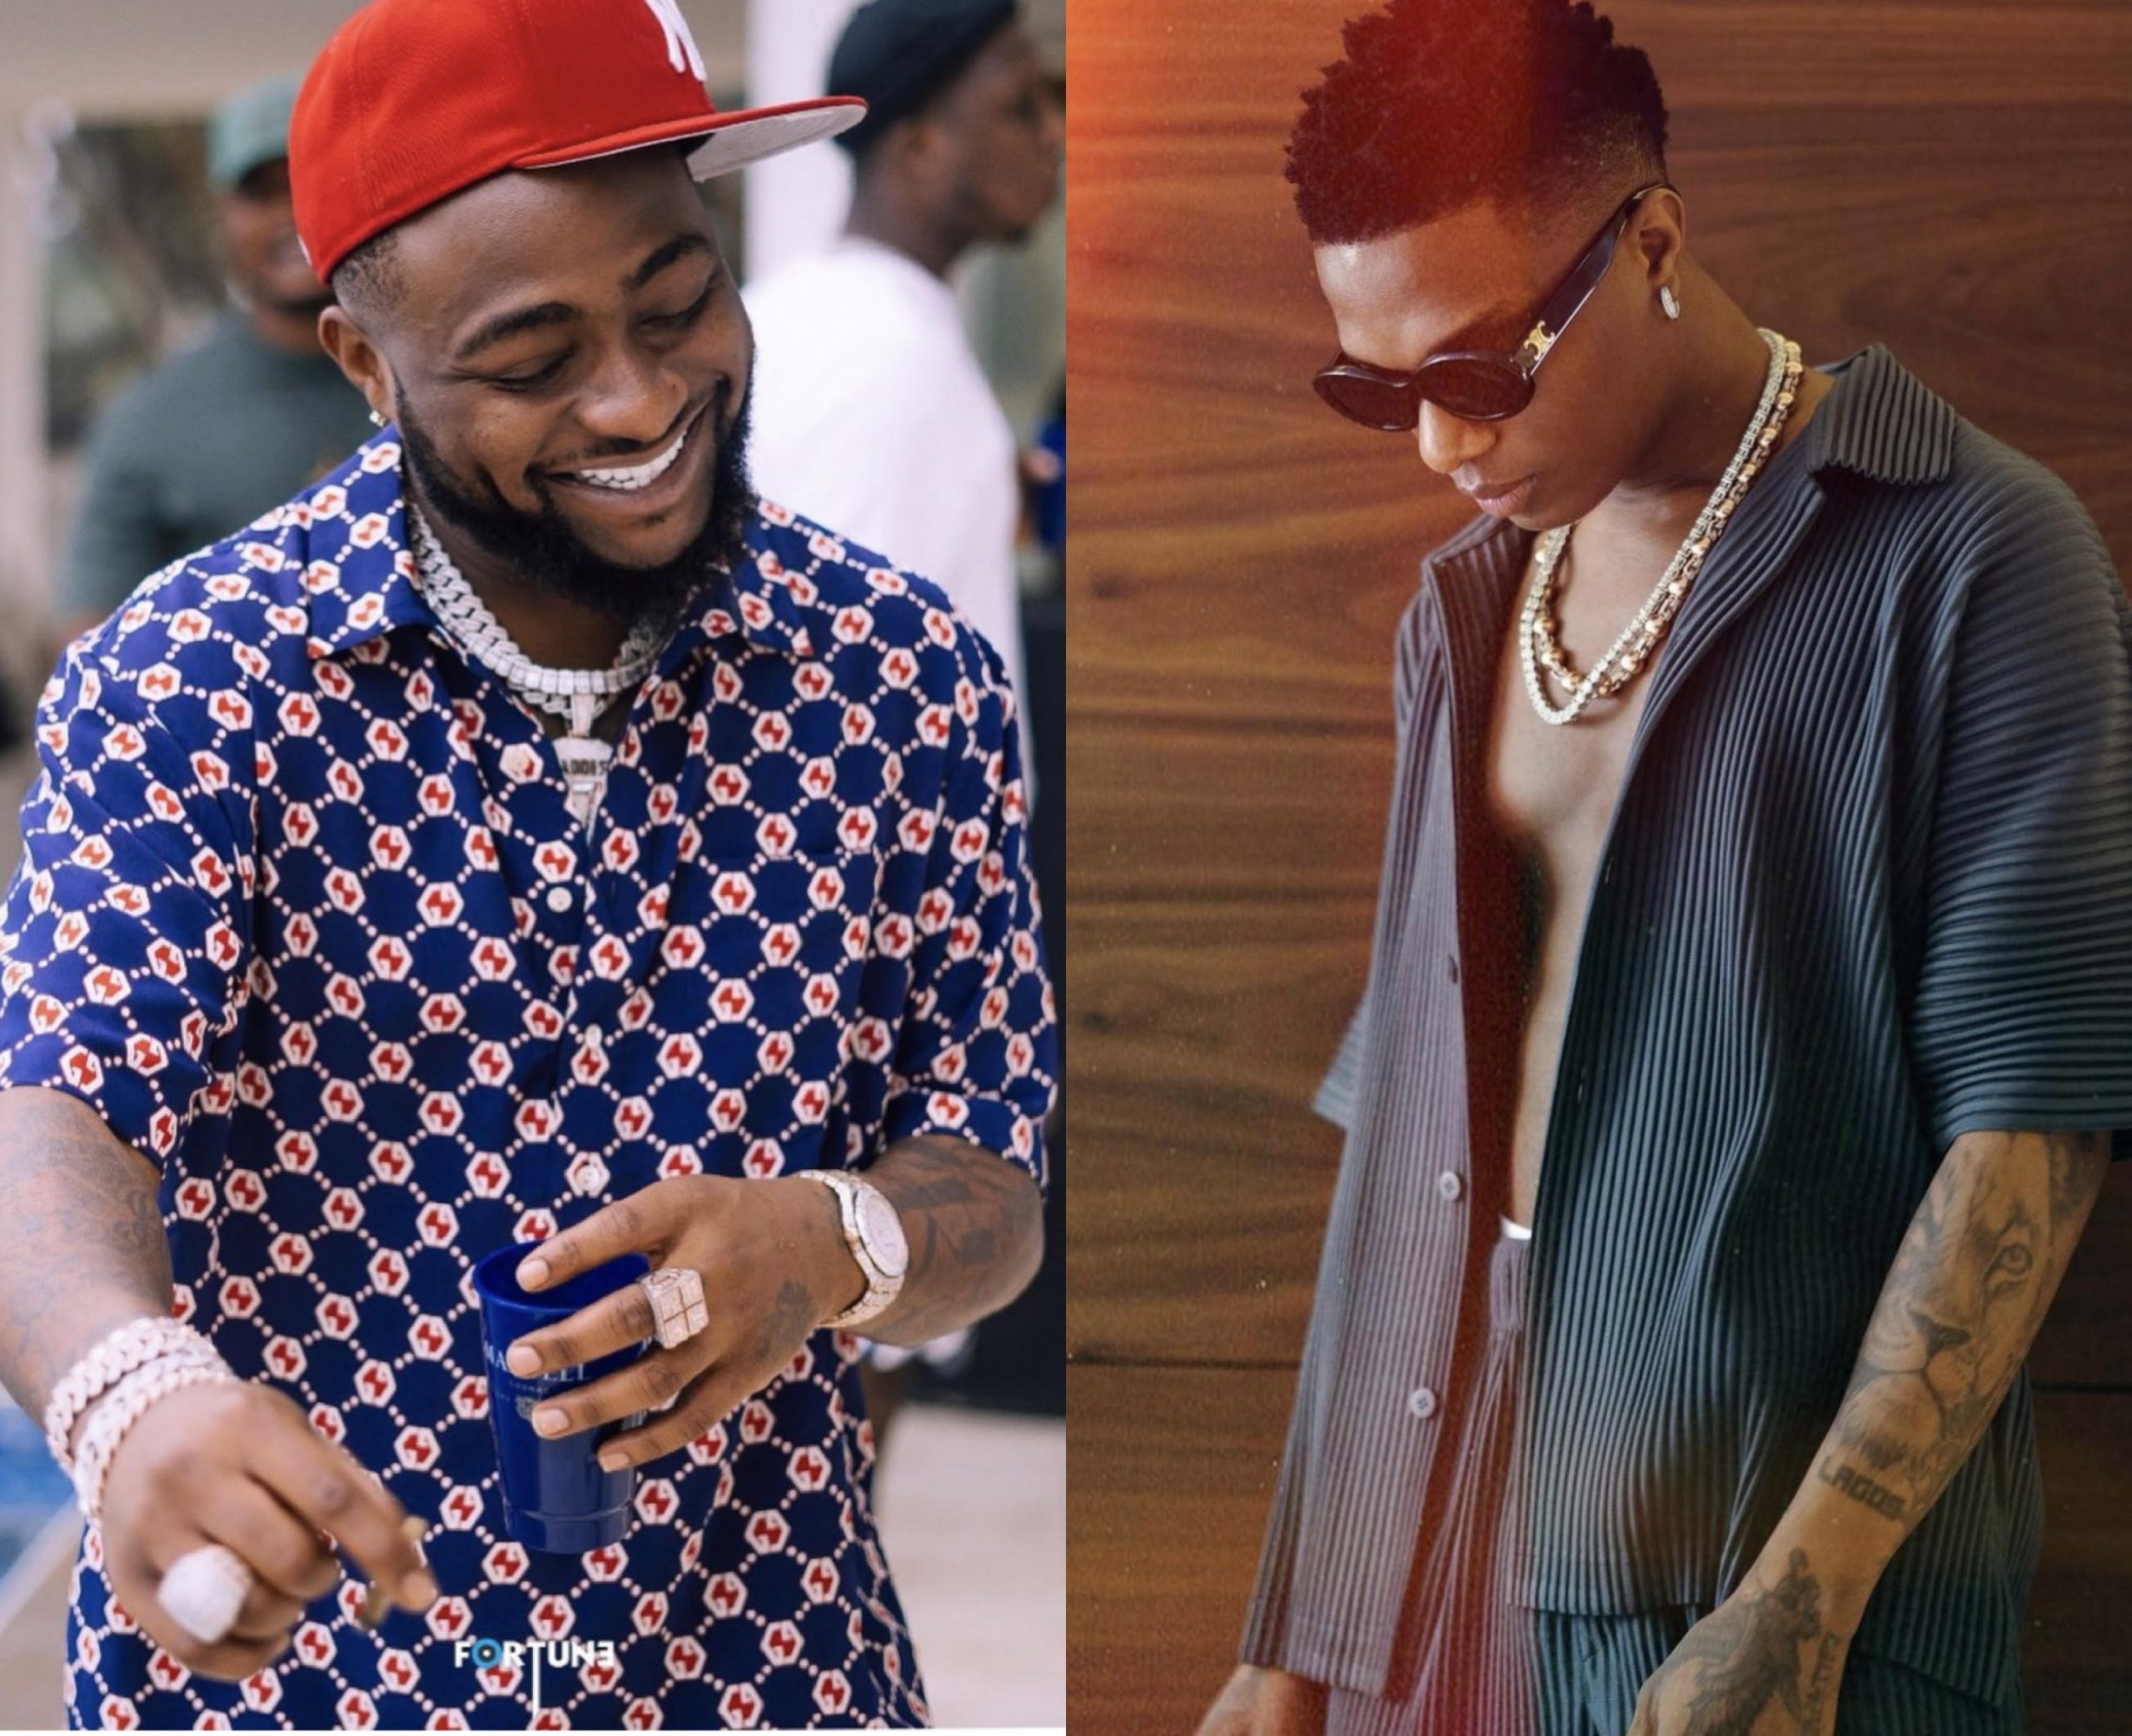 “Now that Davido has Hugged Wizkid, Watch Him Sell-out 02…” See Hilarious Reactions To Wizkid and Davido’s Reconciliation